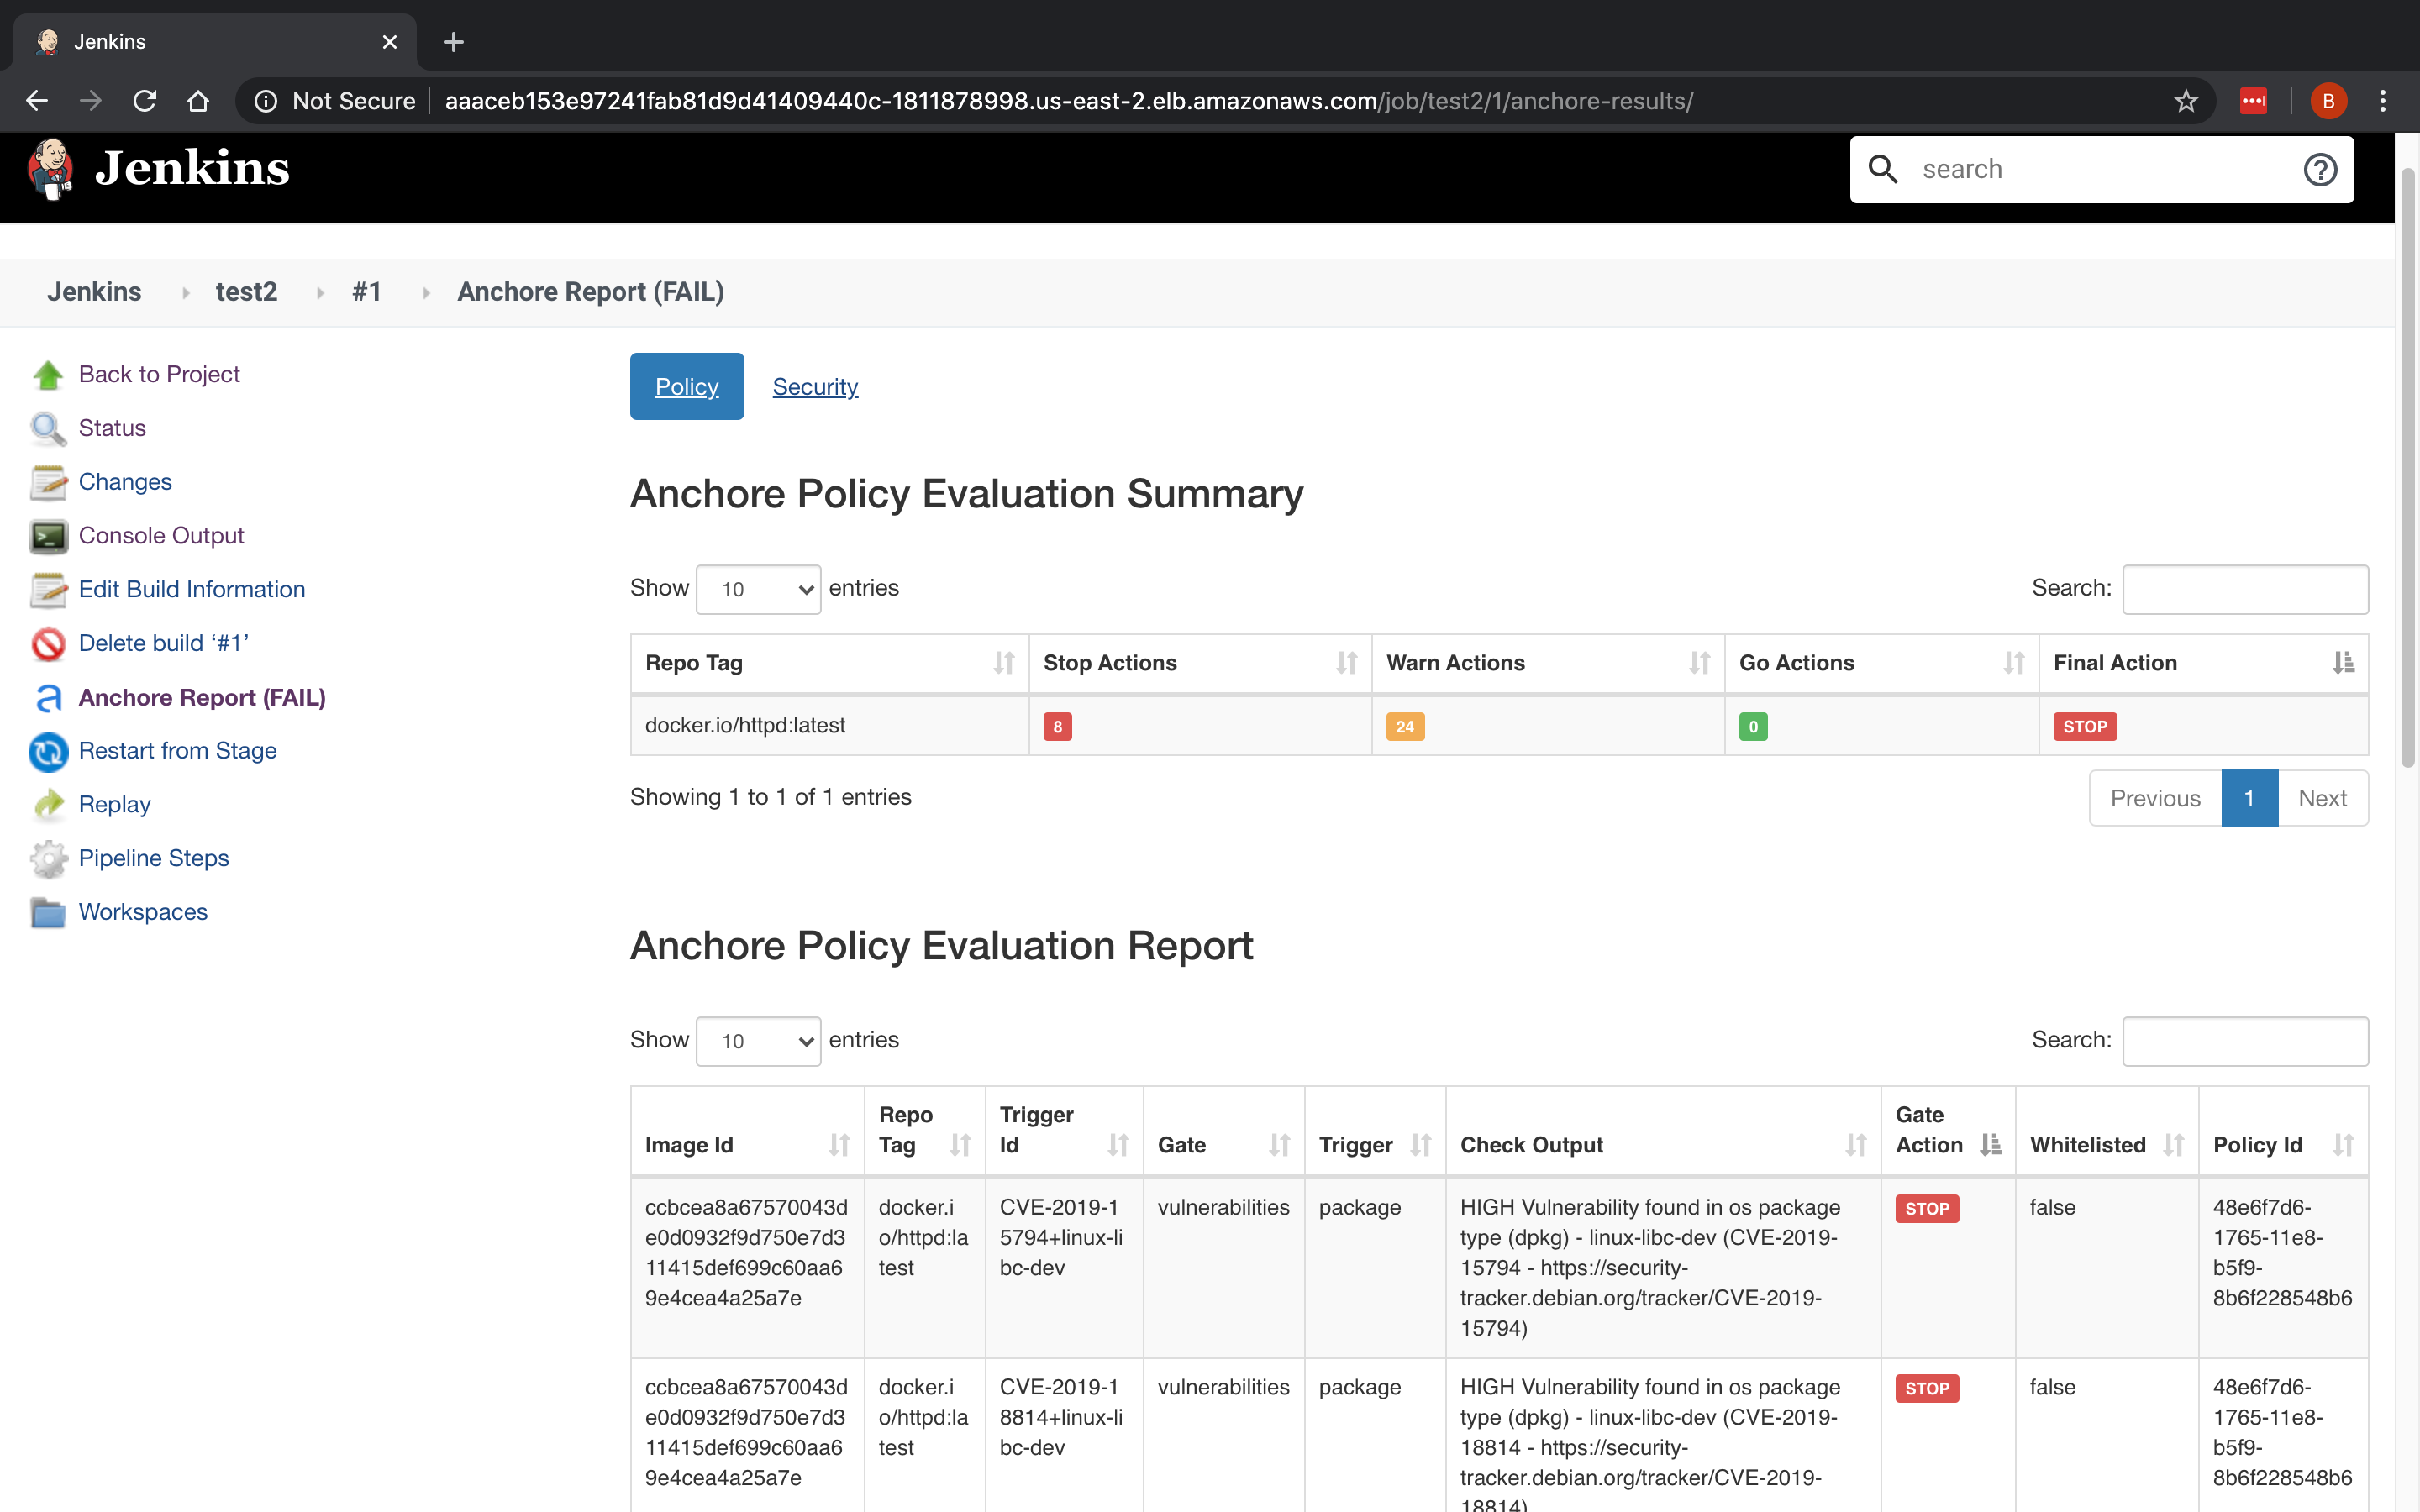 Integrating Anchore Vulnerability Scanning and Compliance with Anchore Policy Evaluation Report